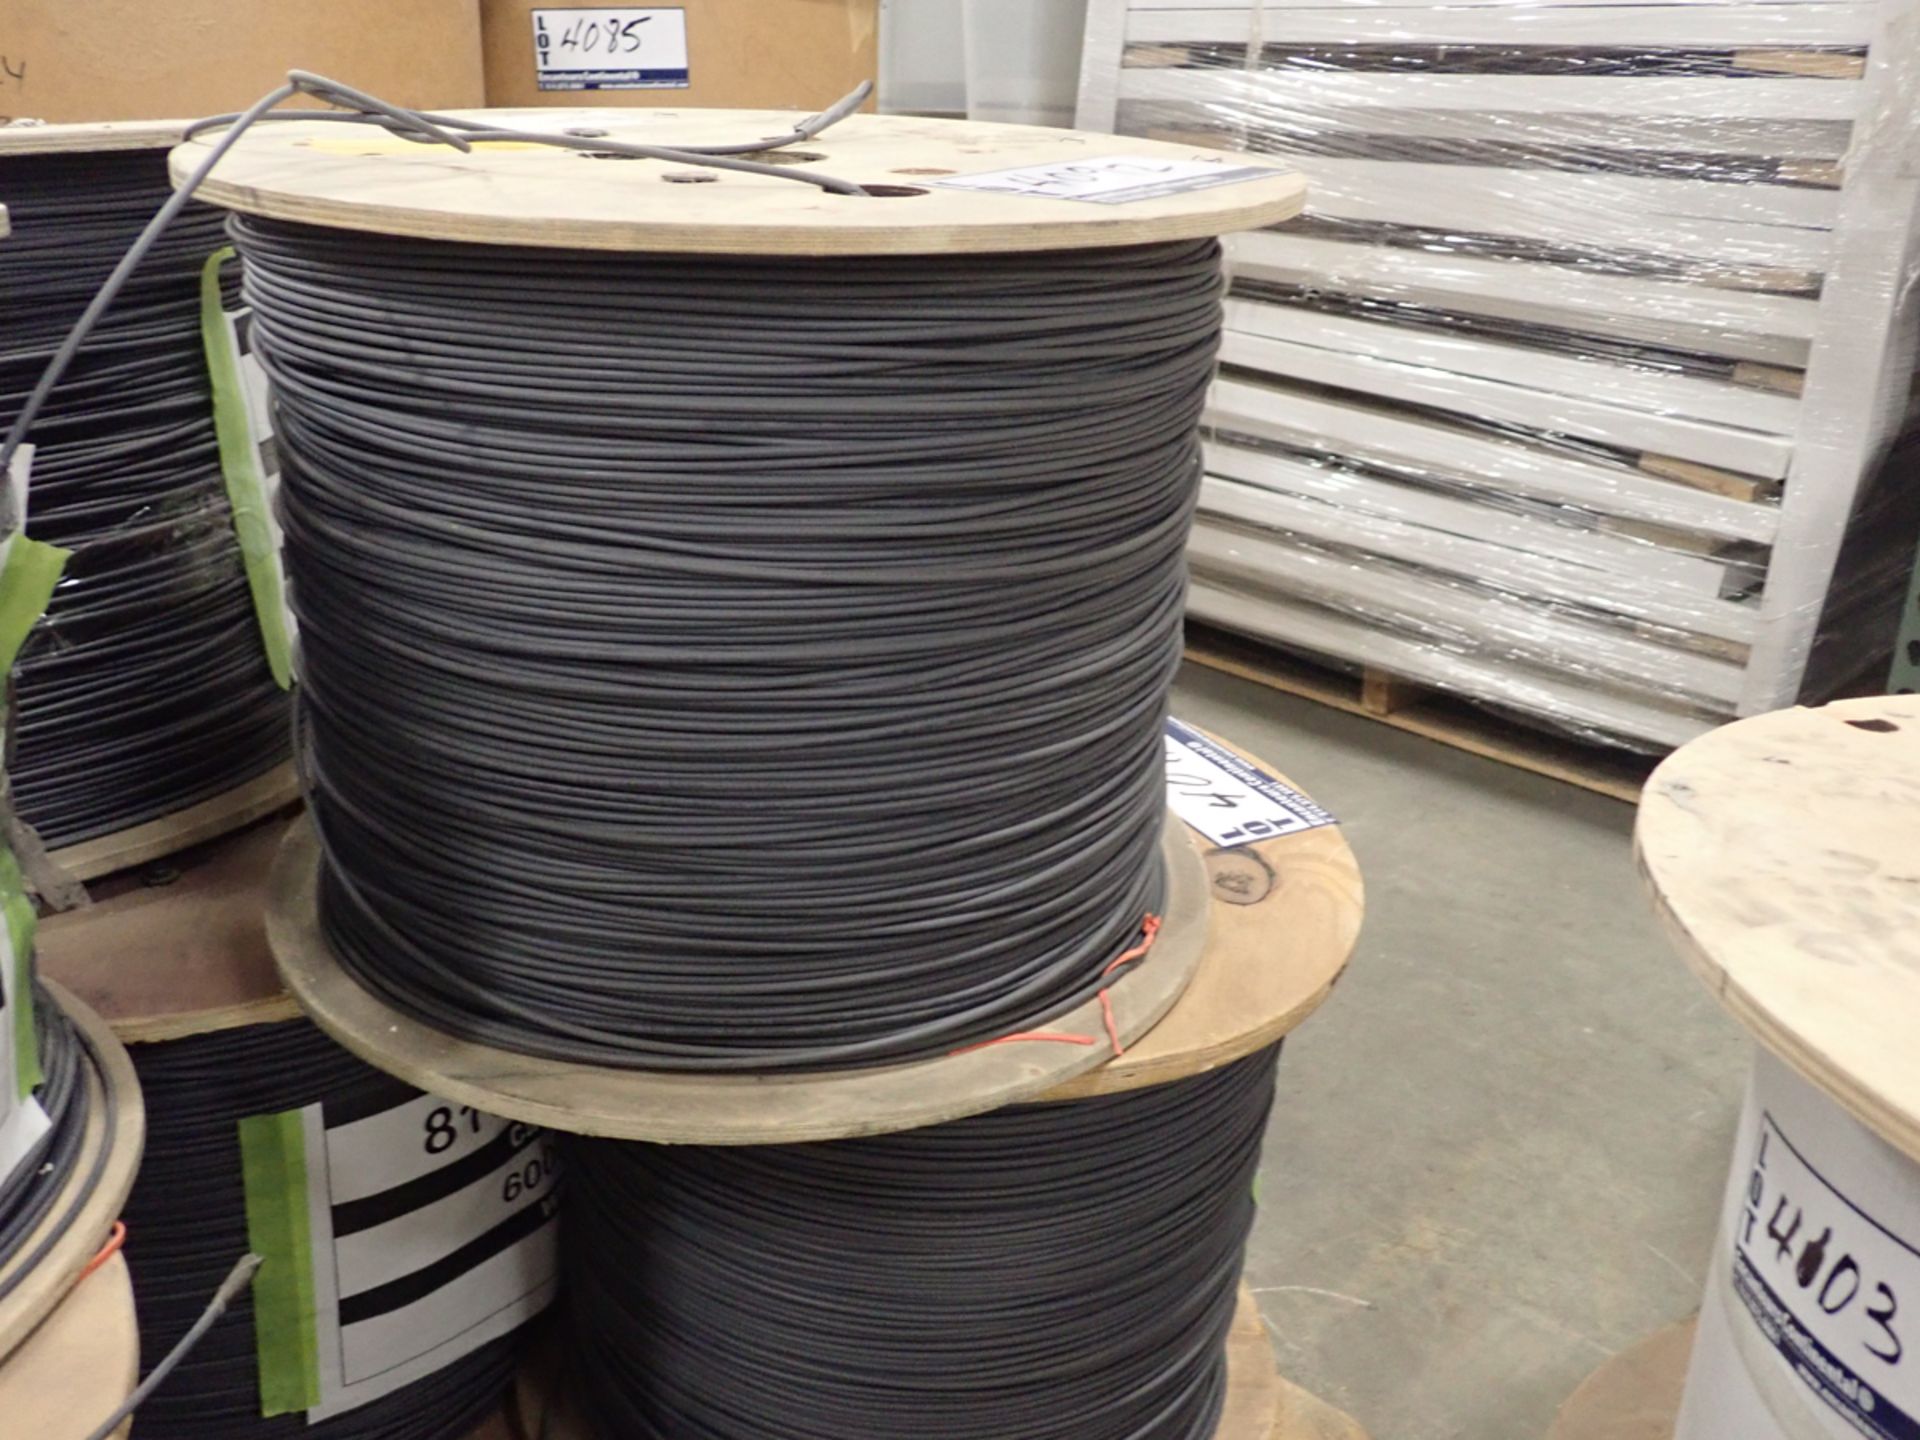 WIRE XLPO 14AWG 19X27 600V 110-125DEG C, 6000 FT, TOTAL WEIGHT 43KG (81080067S) - Image 3 of 14